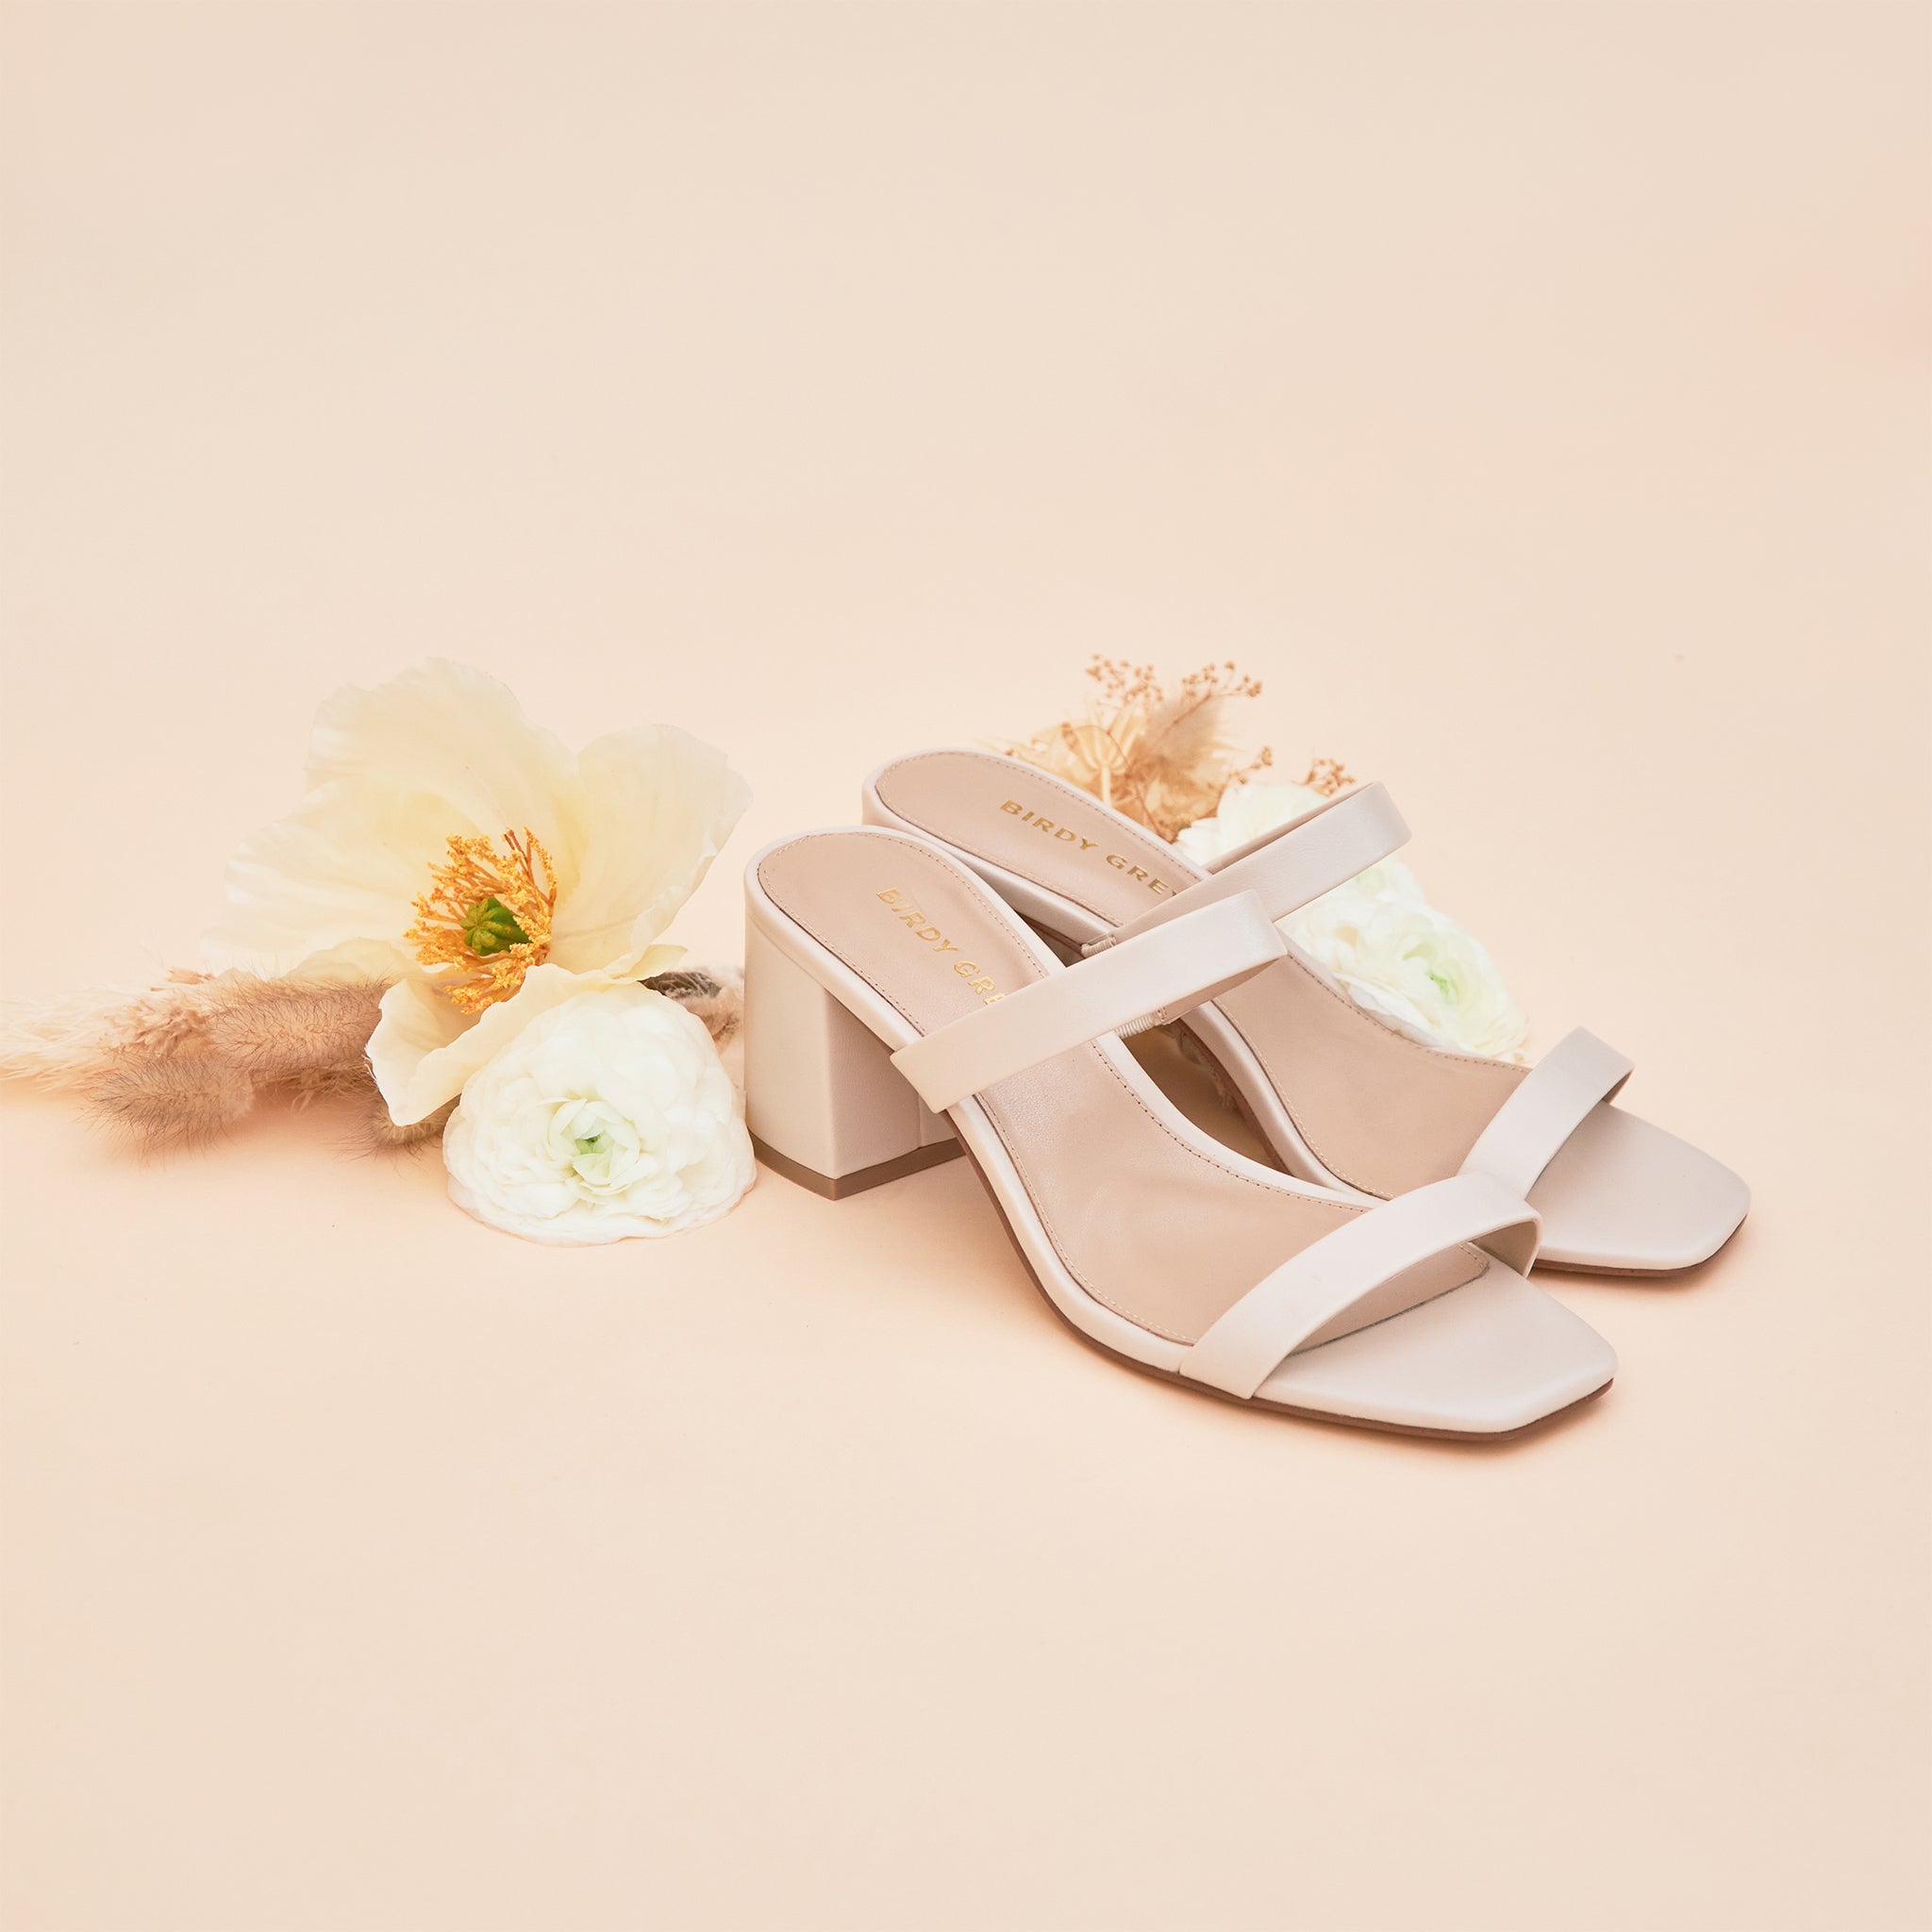 Alby Low Chunky Heel in Almond by Birdy Grey, side view